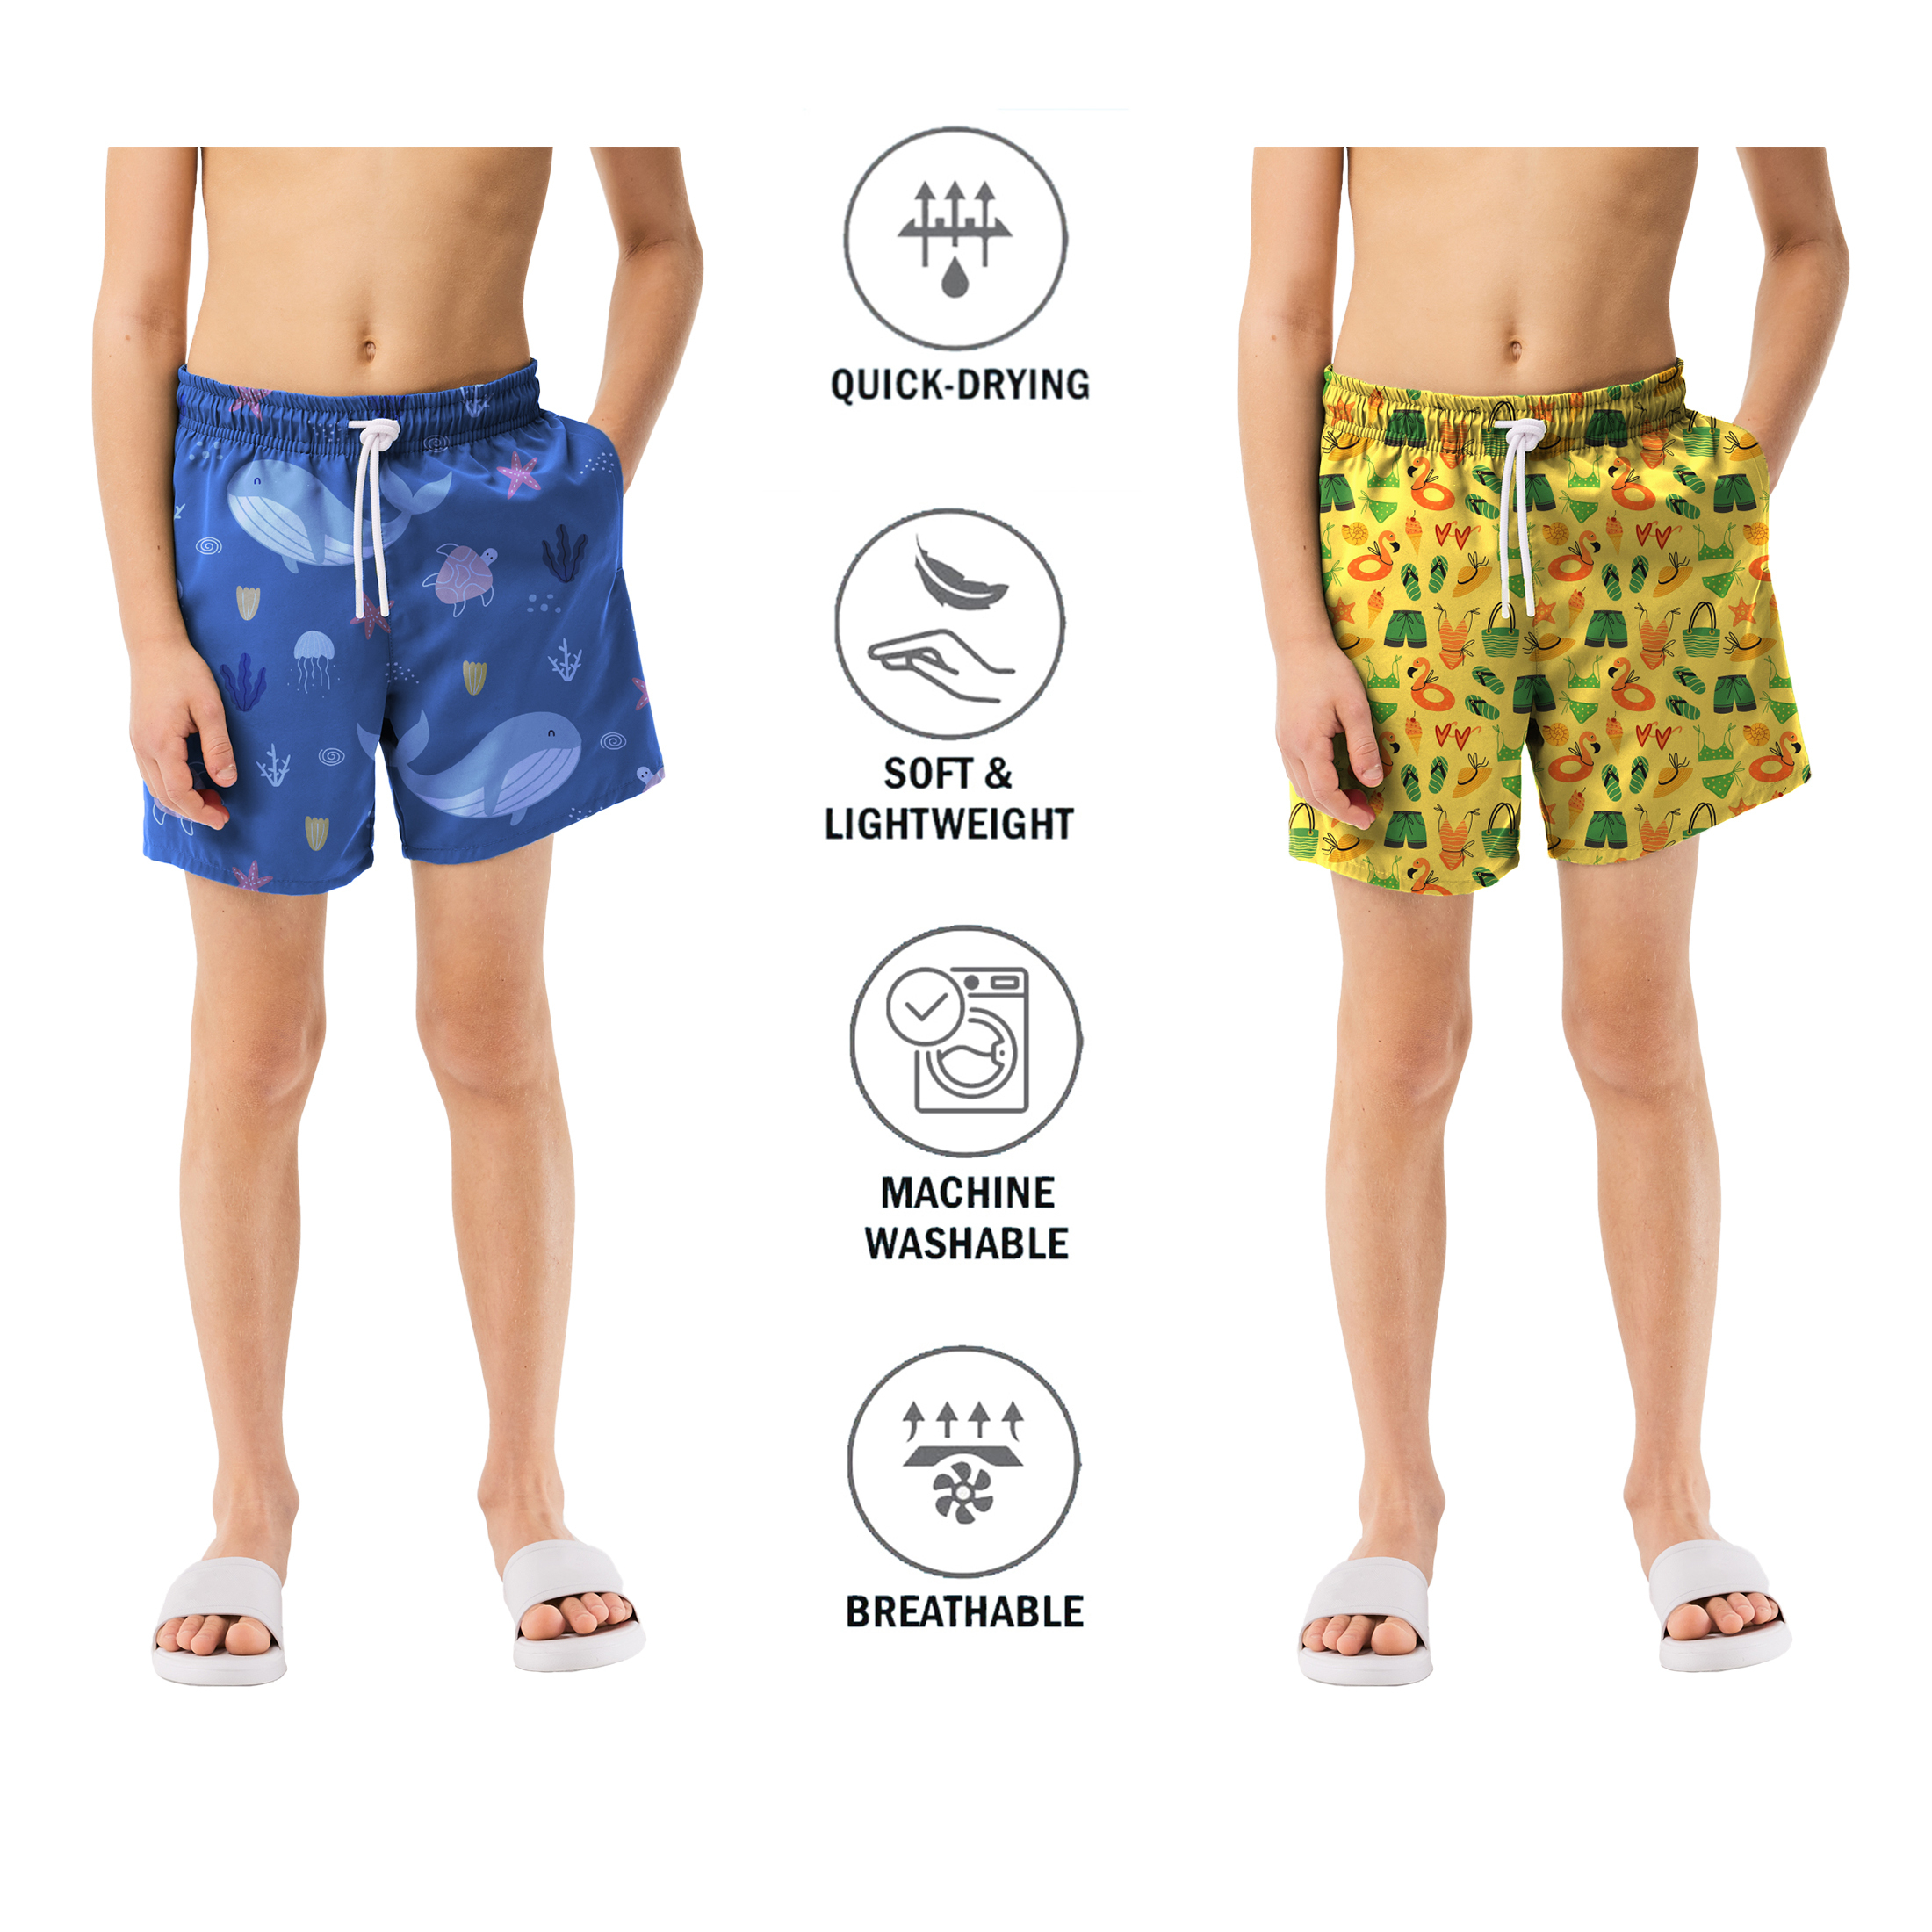 4-Pack Boy's Beach Summer Swim Trunk Shorts Printed Bathing Quick Dry UPF 50+ Comfy Swimsuit - L